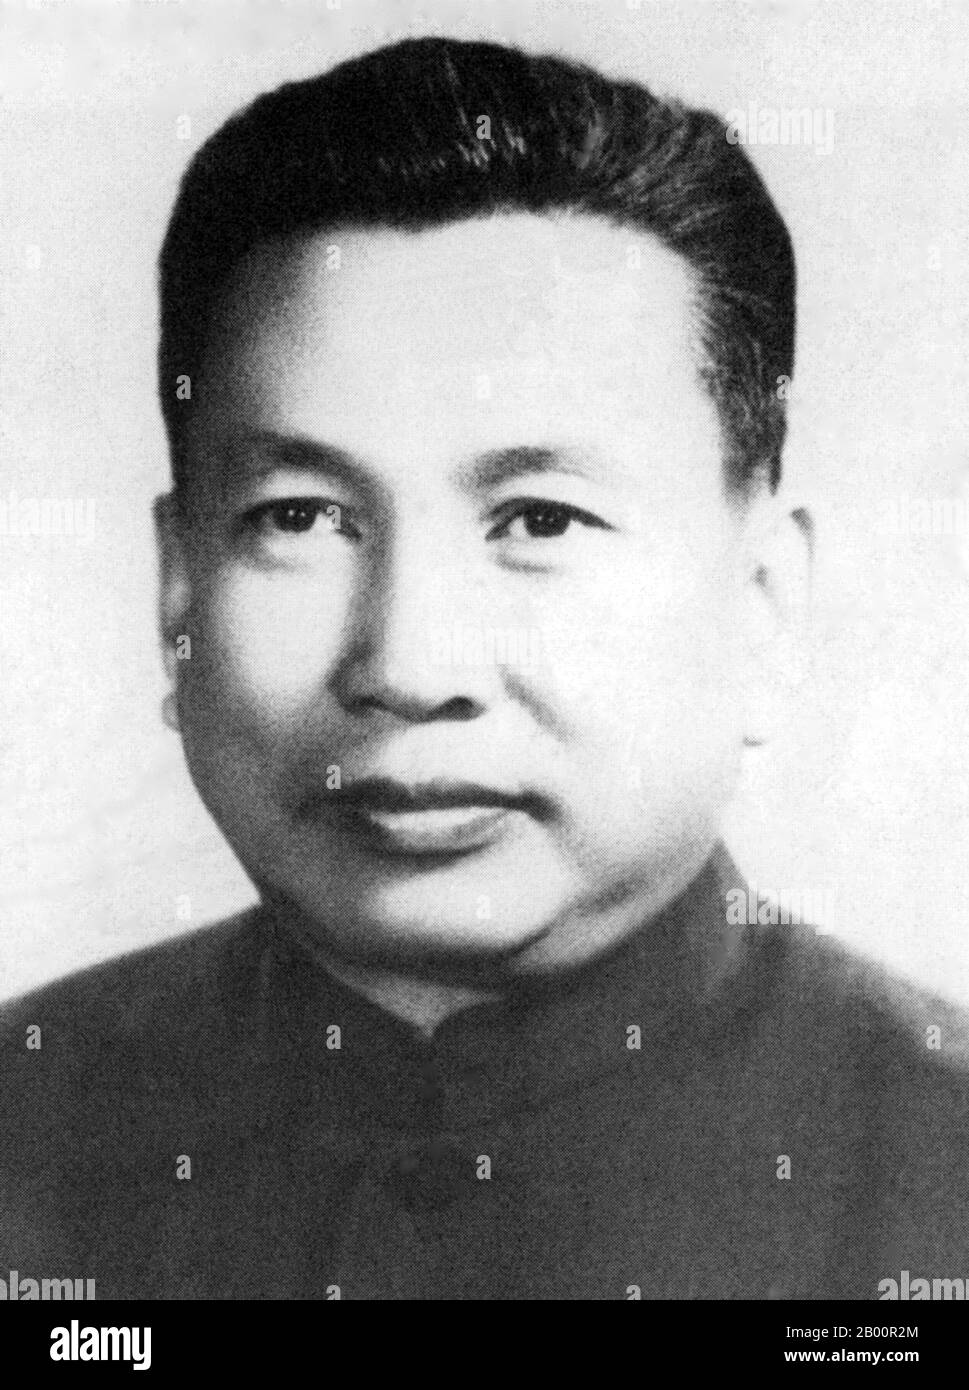 Cambodia: Saloth Sar (1928–1998), better known as Pol Pot.  Saloth Sar (May 19, 1928–April 15, 1998), better known as Pol Pot, was the leader of the Cambodian communist movement known as the Khmer Rouge and Prime Minister of Democratic Kampuchea from 1976–1979. In 1979, after the invasion of Cambodia by Vietnam, Pol Pot fled into the jungles of southwest Cambodia. Pol Pot died in 1998 while held under house arrest by the Ta Mok faction of the Khmer Rouge. Stock Photo